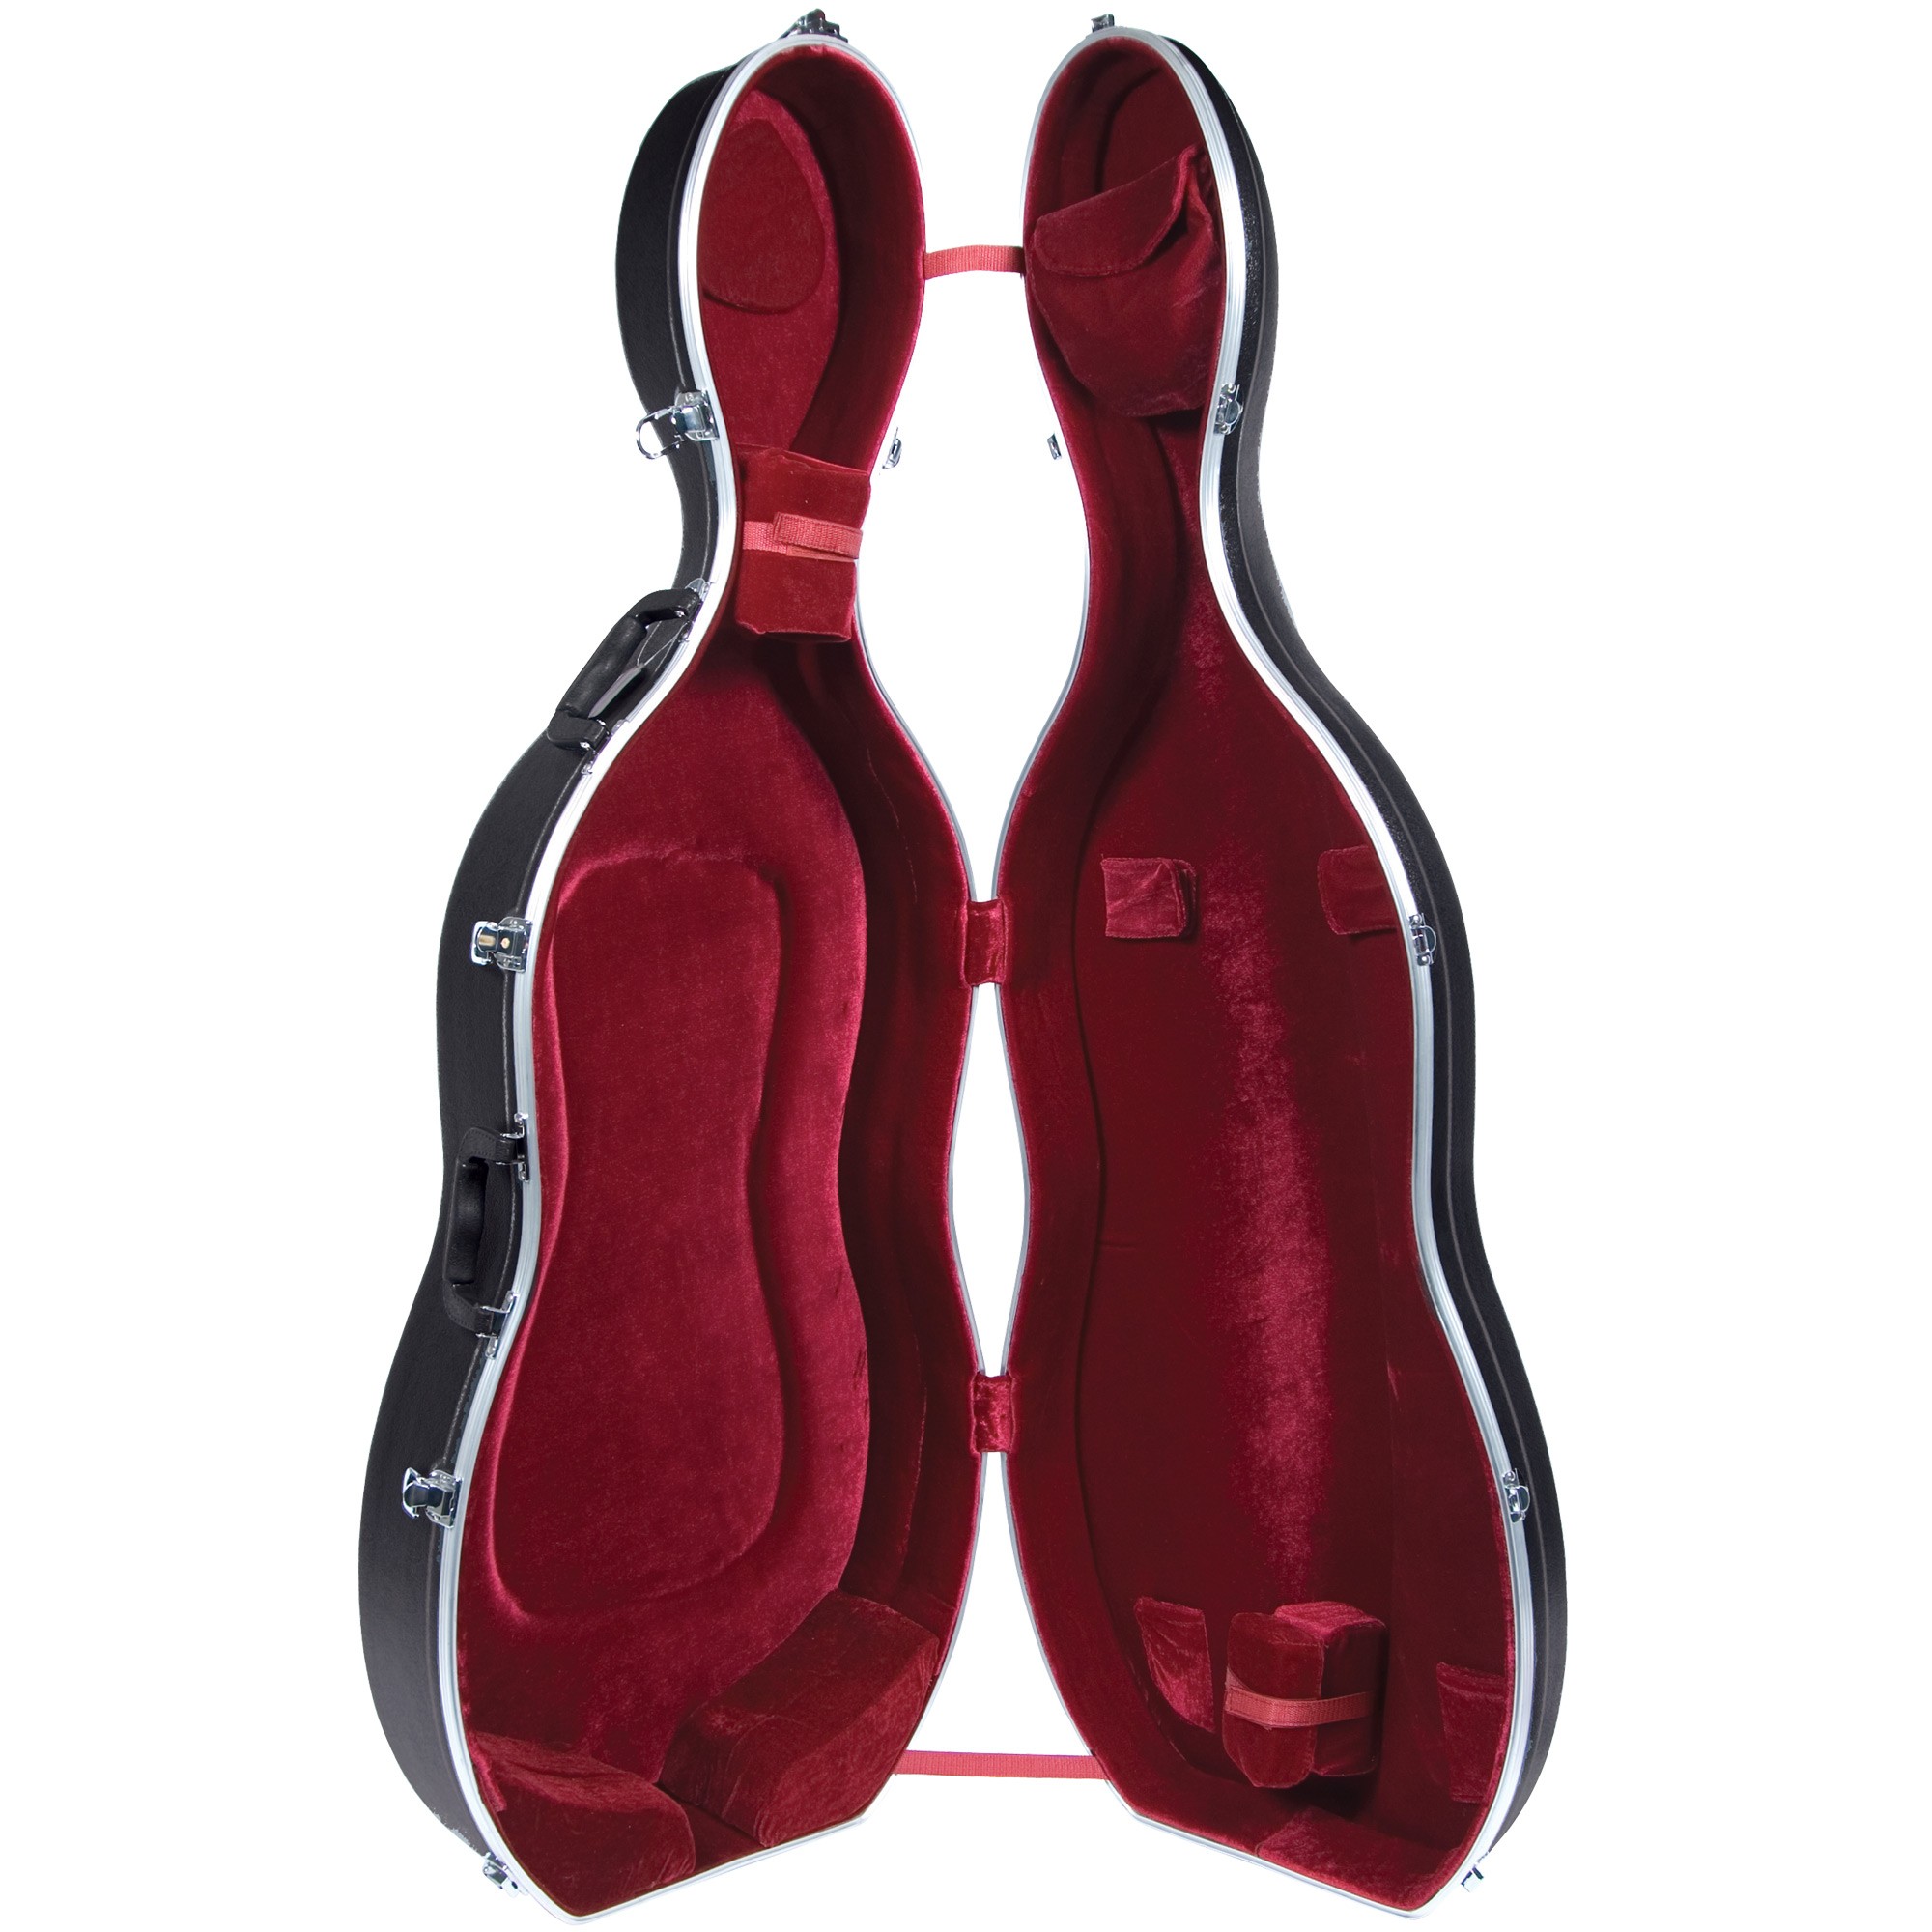 Southwest Strings Thermoplastic Cello Case